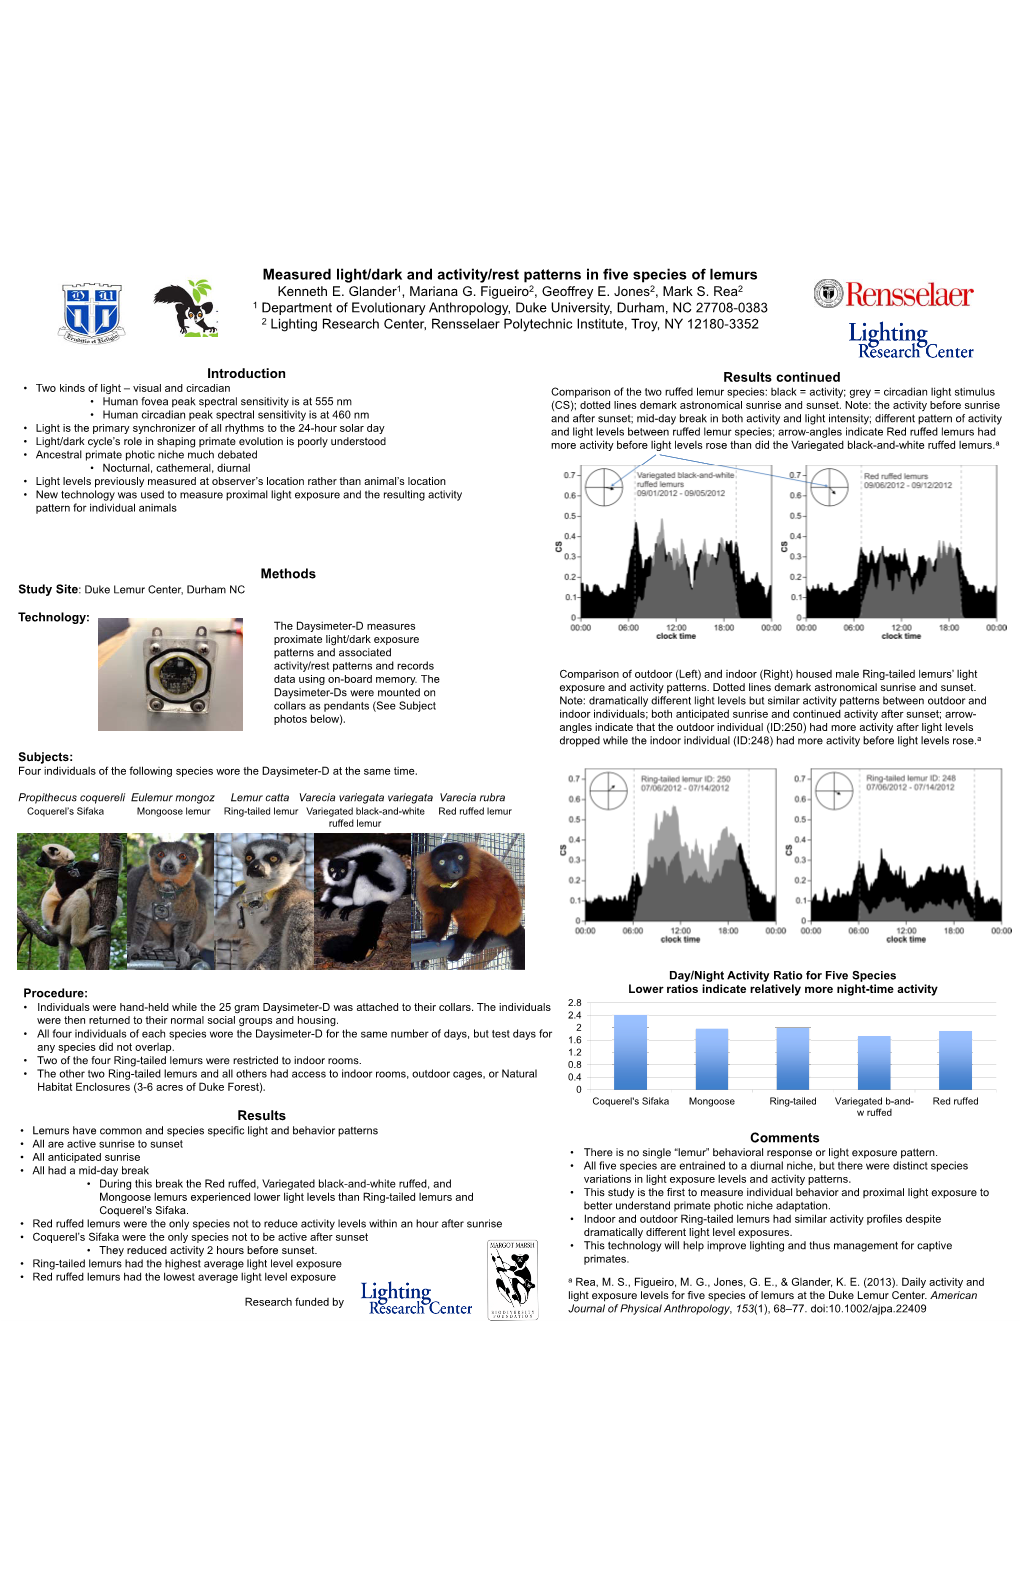 Measured Light/Dark and Activity/Rest Patterns in Five Species of Lemurs Kenneth E